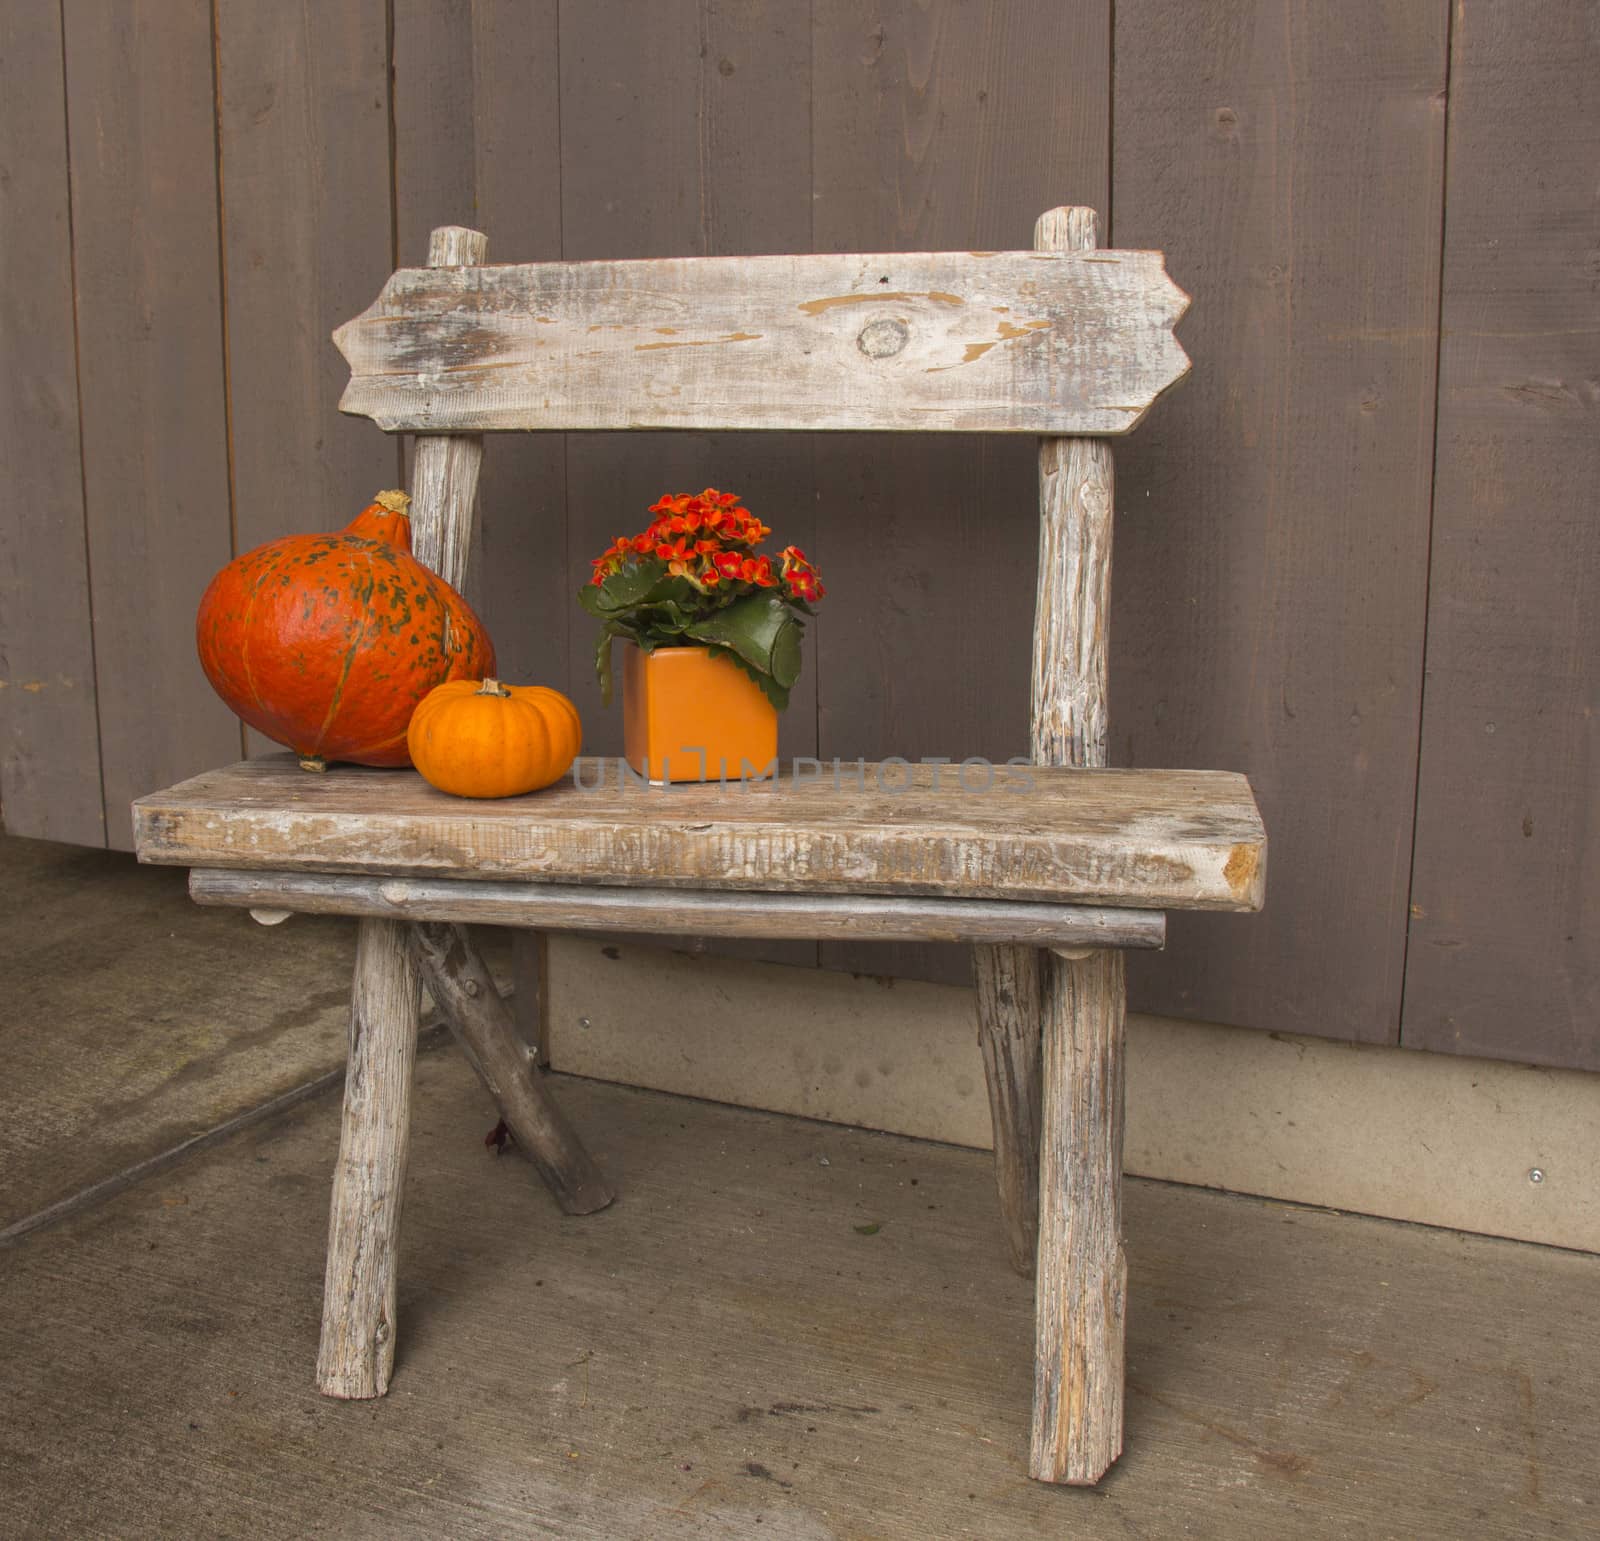 Small wooden Bench with decorations by snowwhite